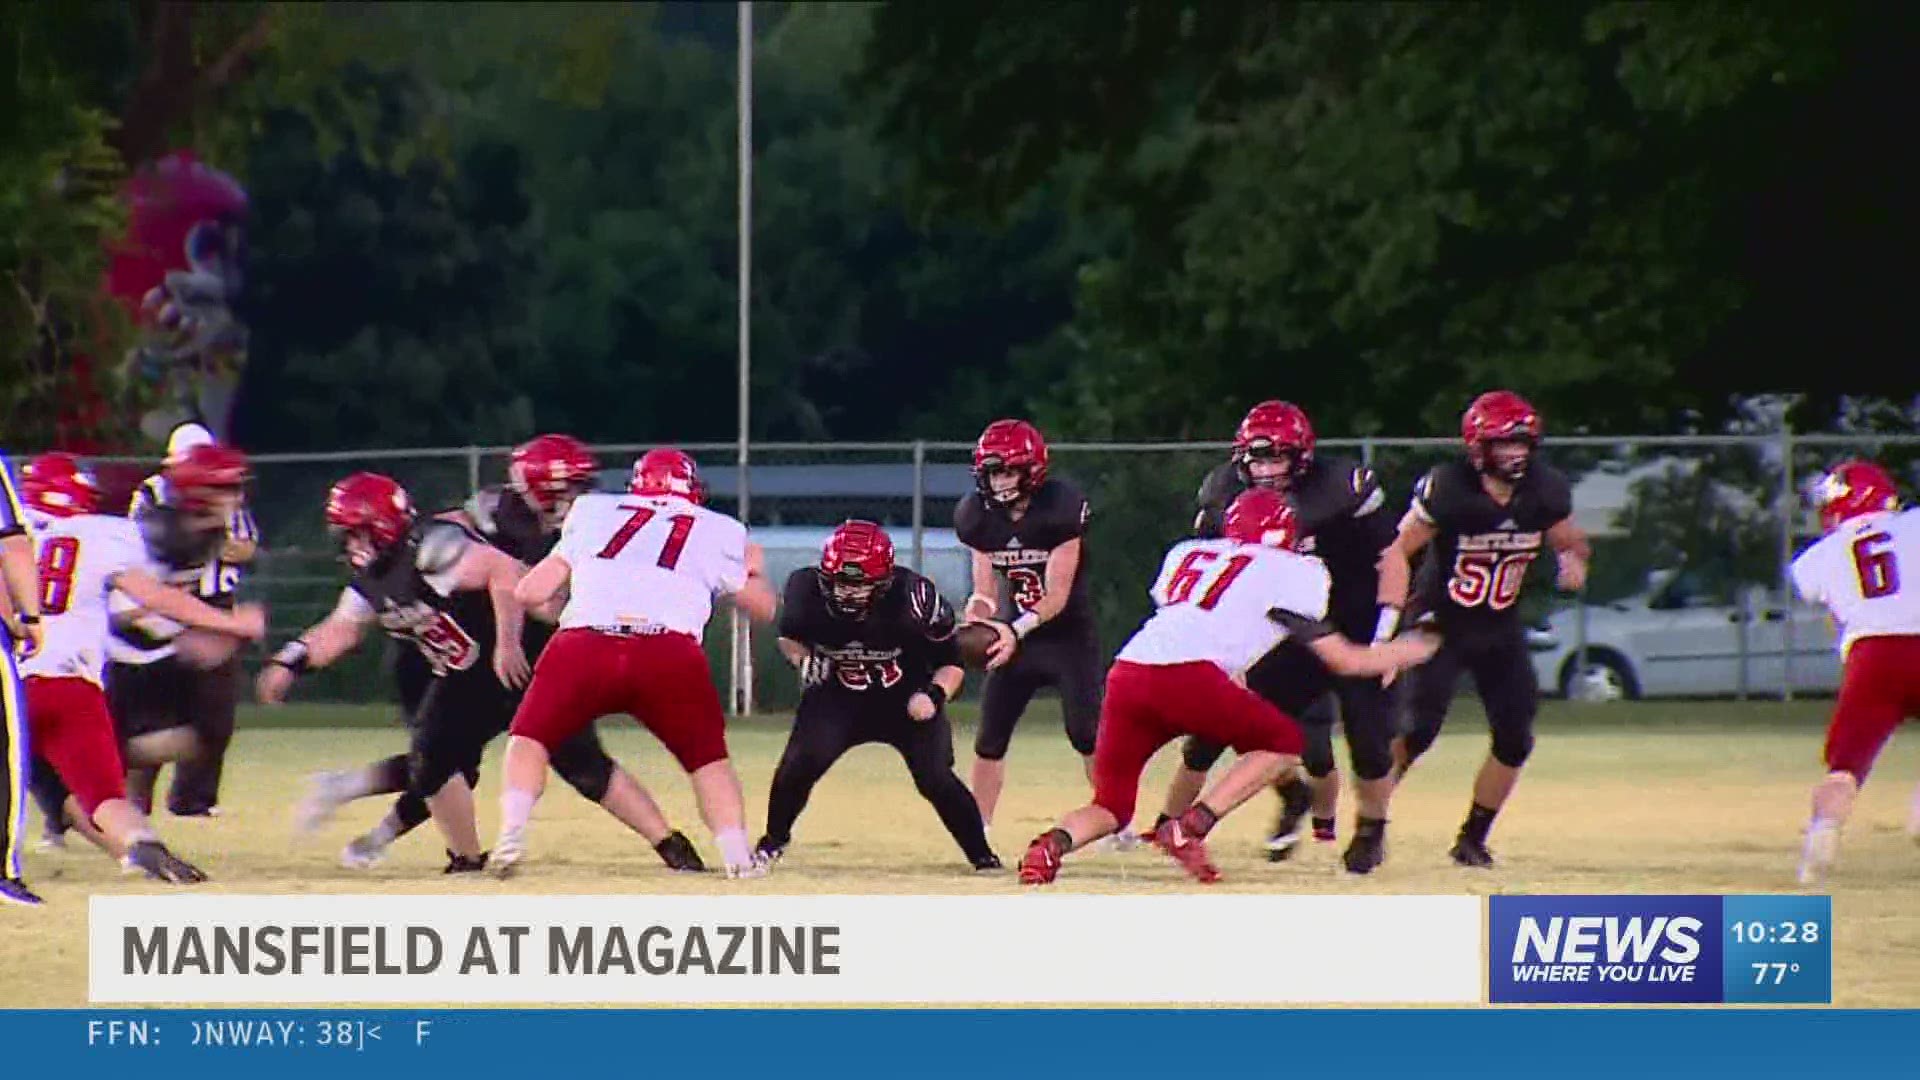 The Mansfield Tigers traveled to Magazine to kick off the 2020 football season.